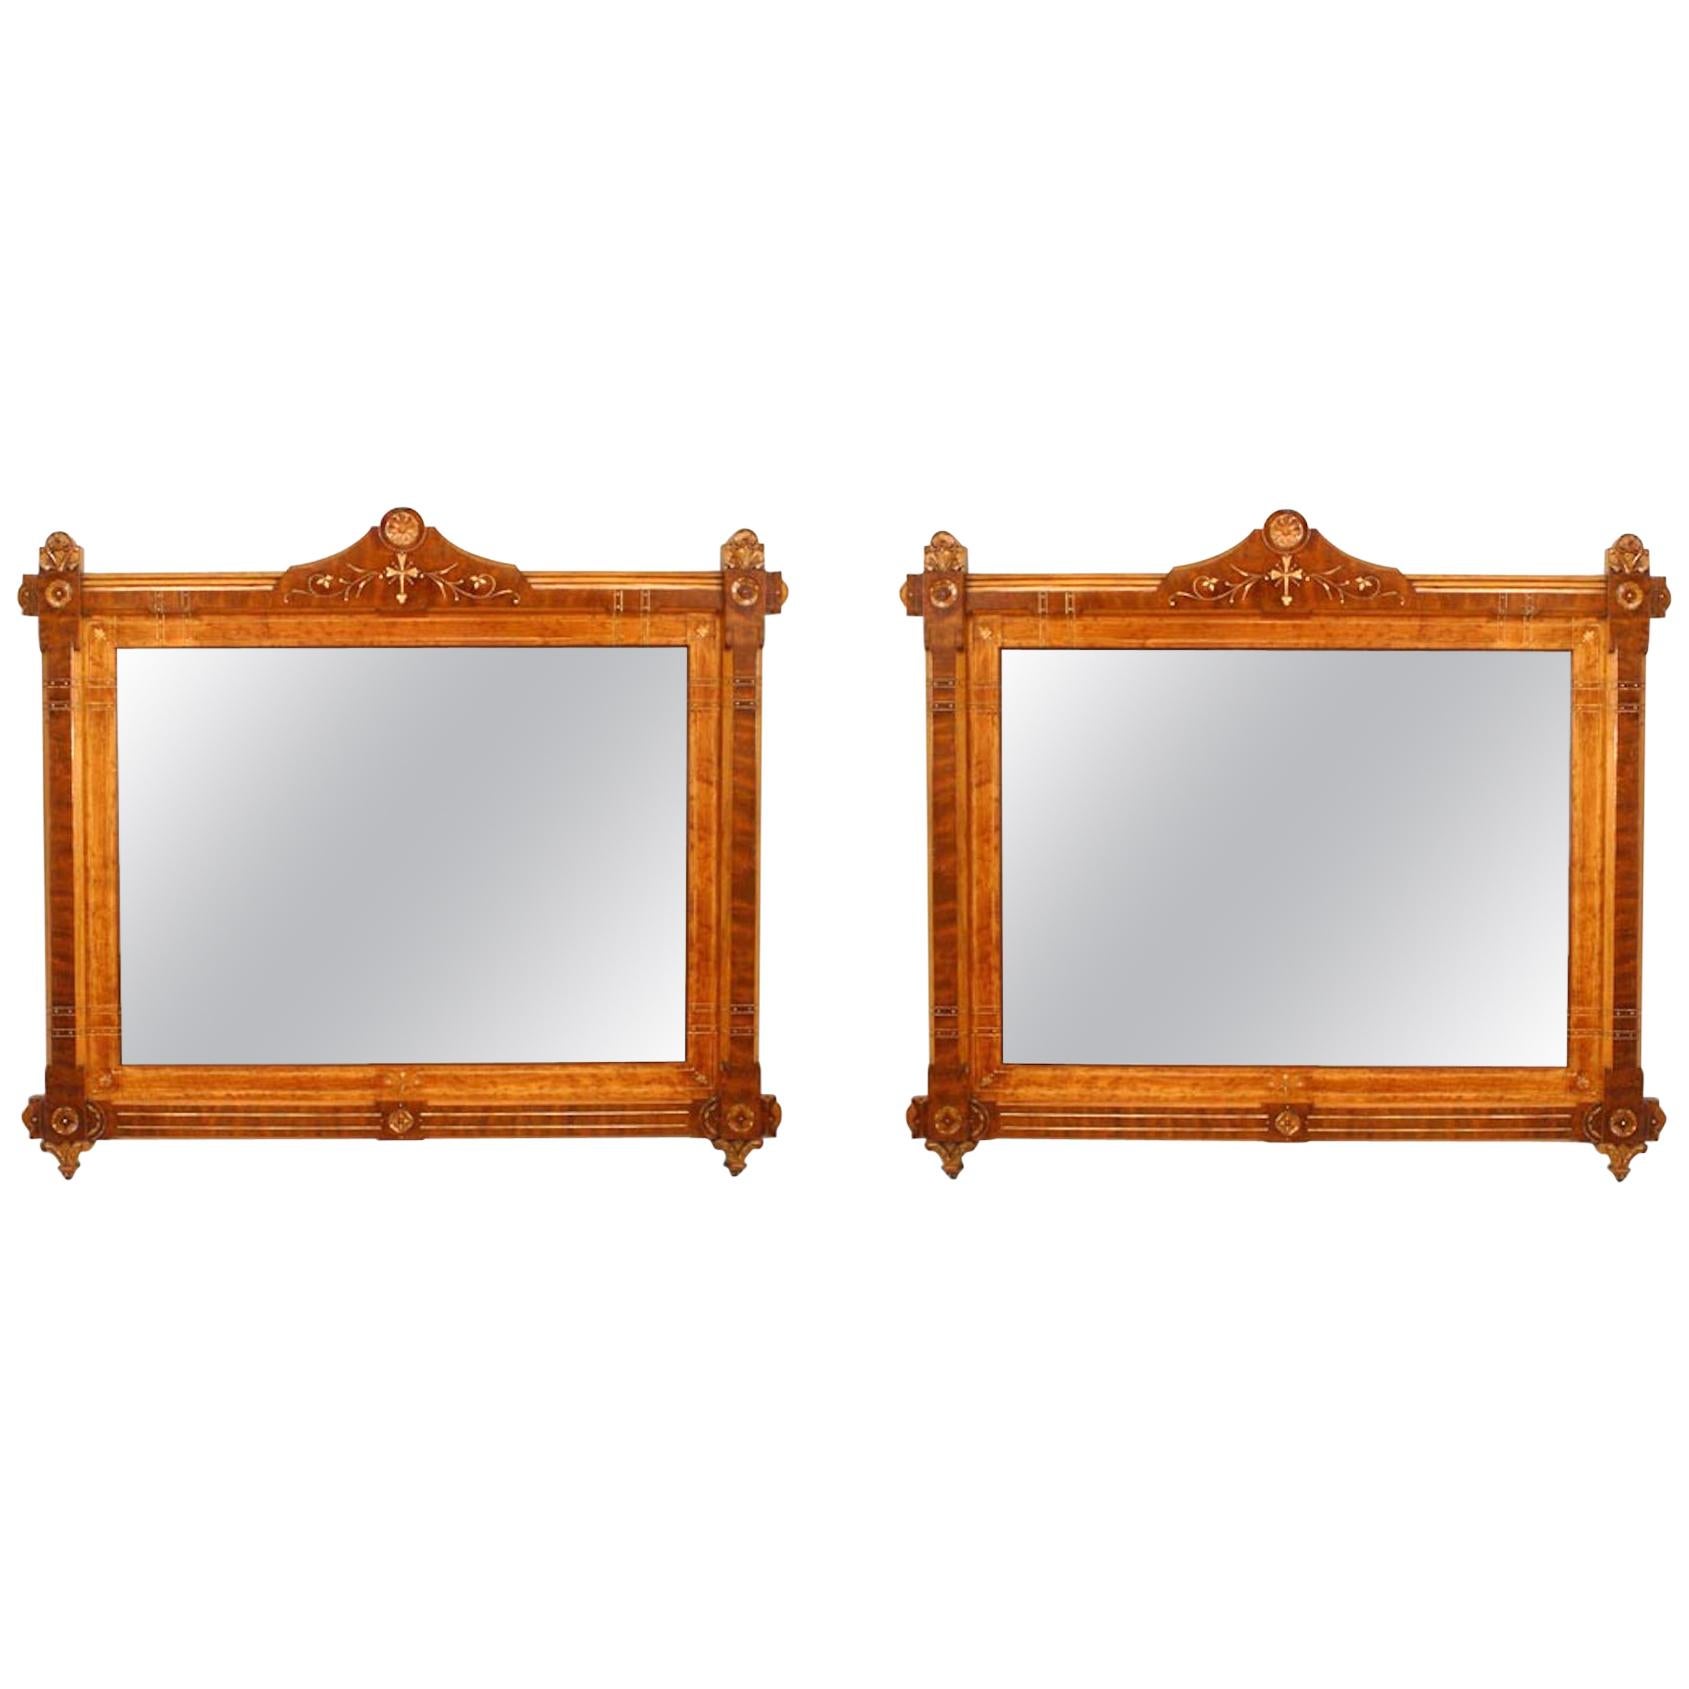 Pair of Victorian Eastlake Walnut and Birdseye Maple Carved Wall Mirrors